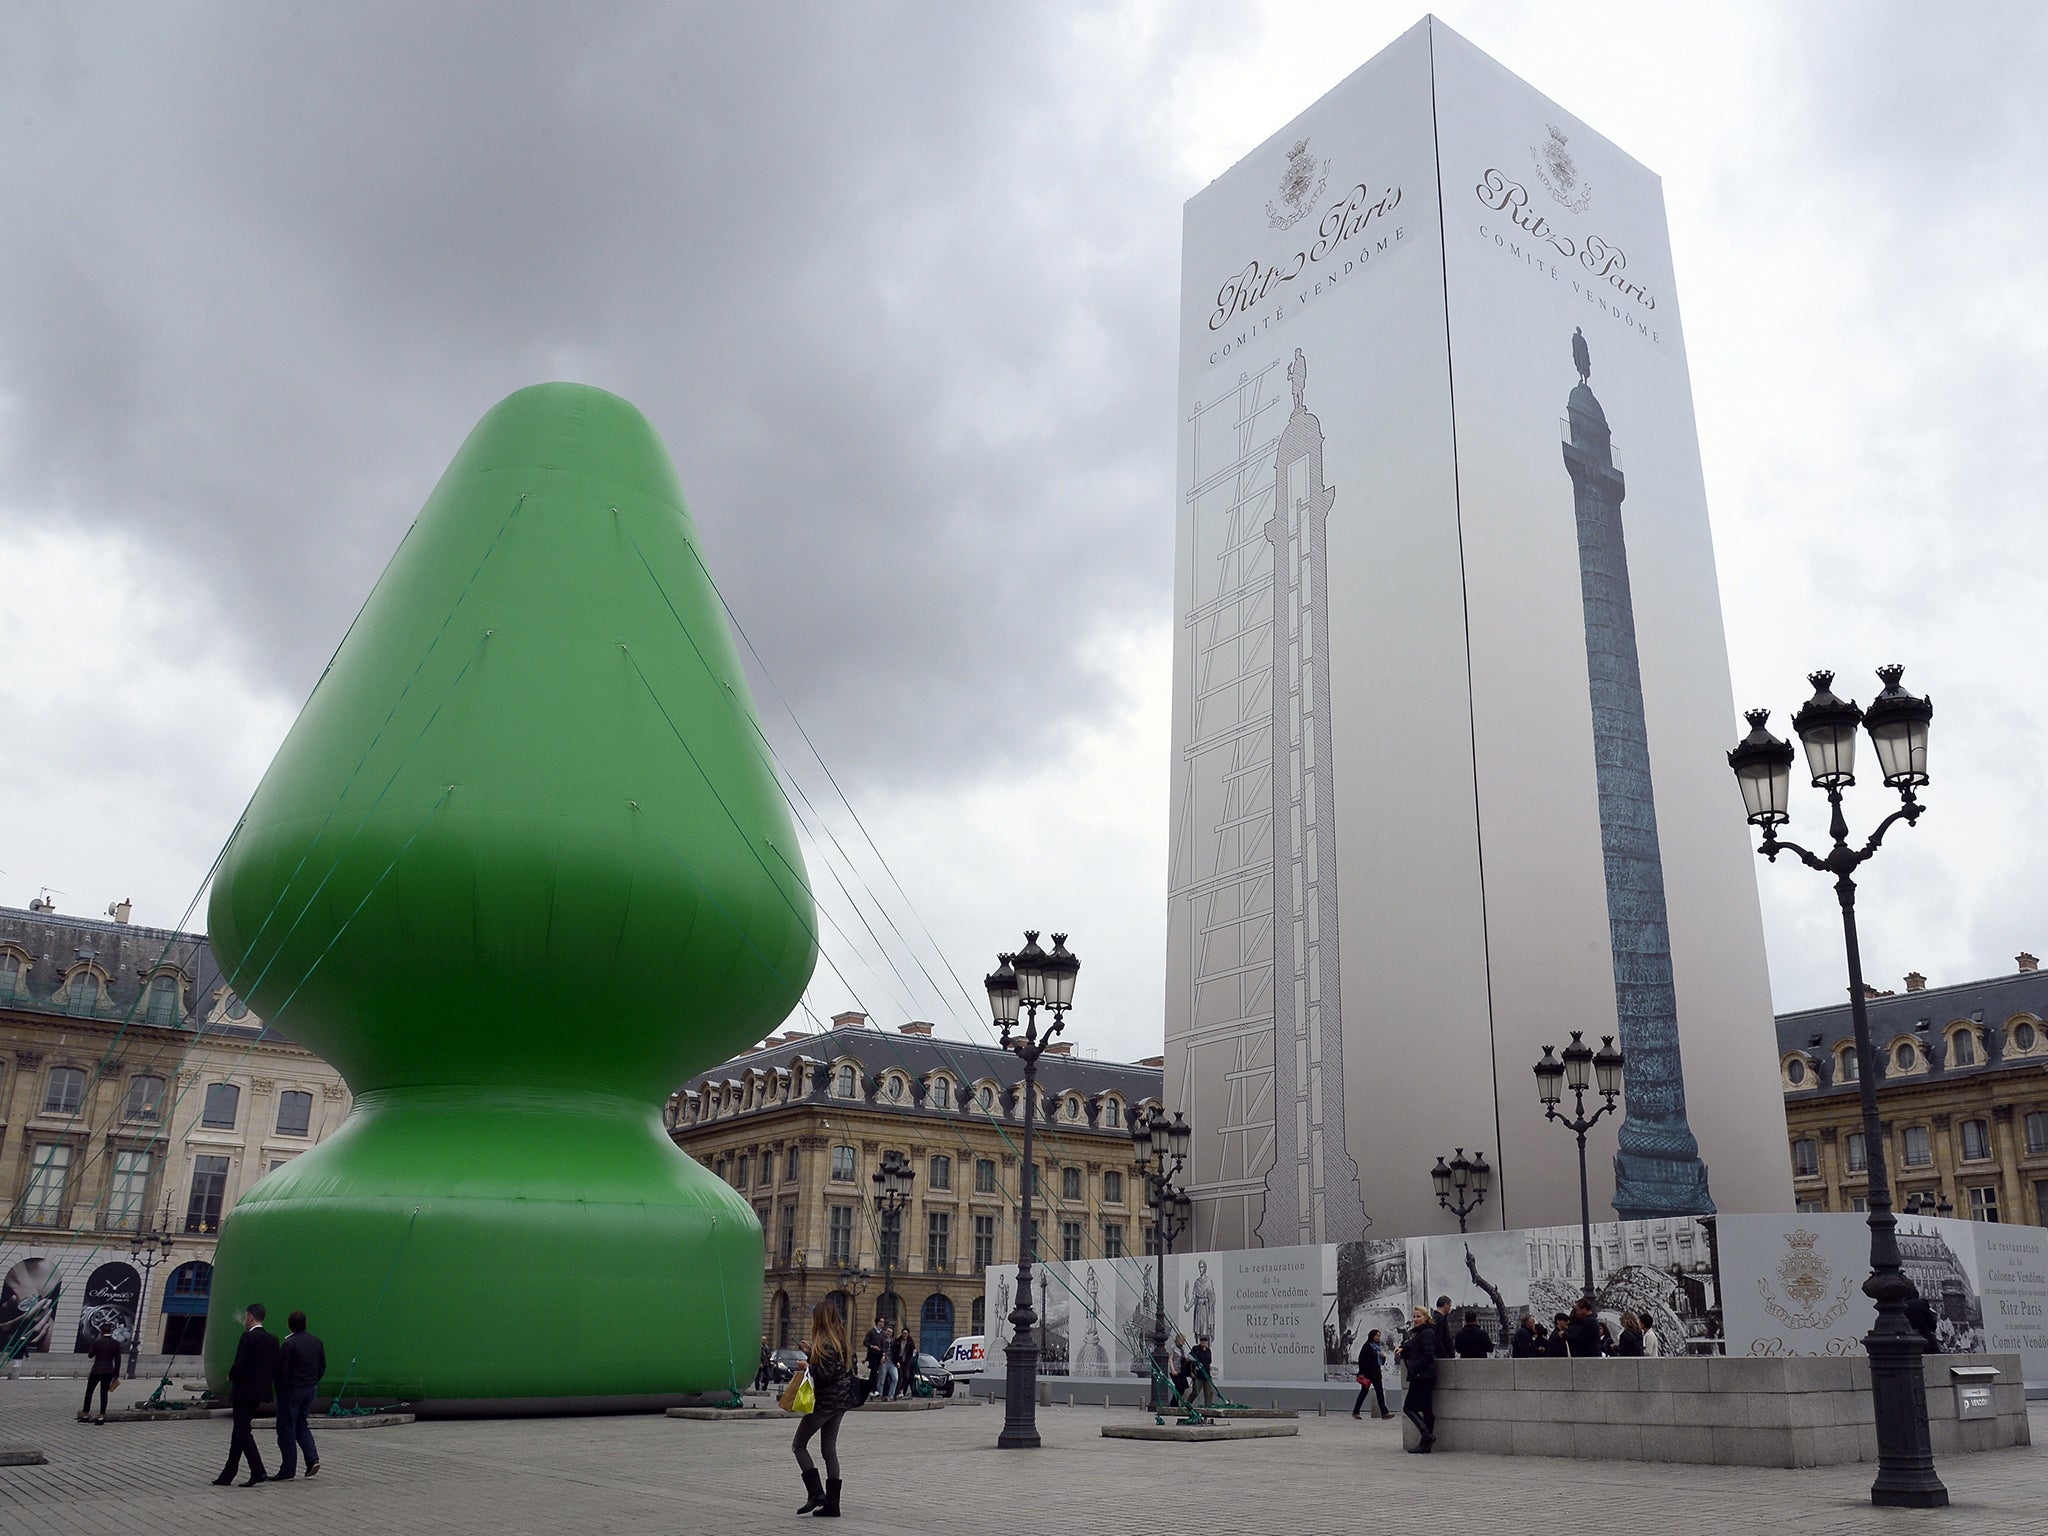 Paul McCarthy's inflatable sculpture of a Christmas tree is displayed on the Place Vendome in Paris